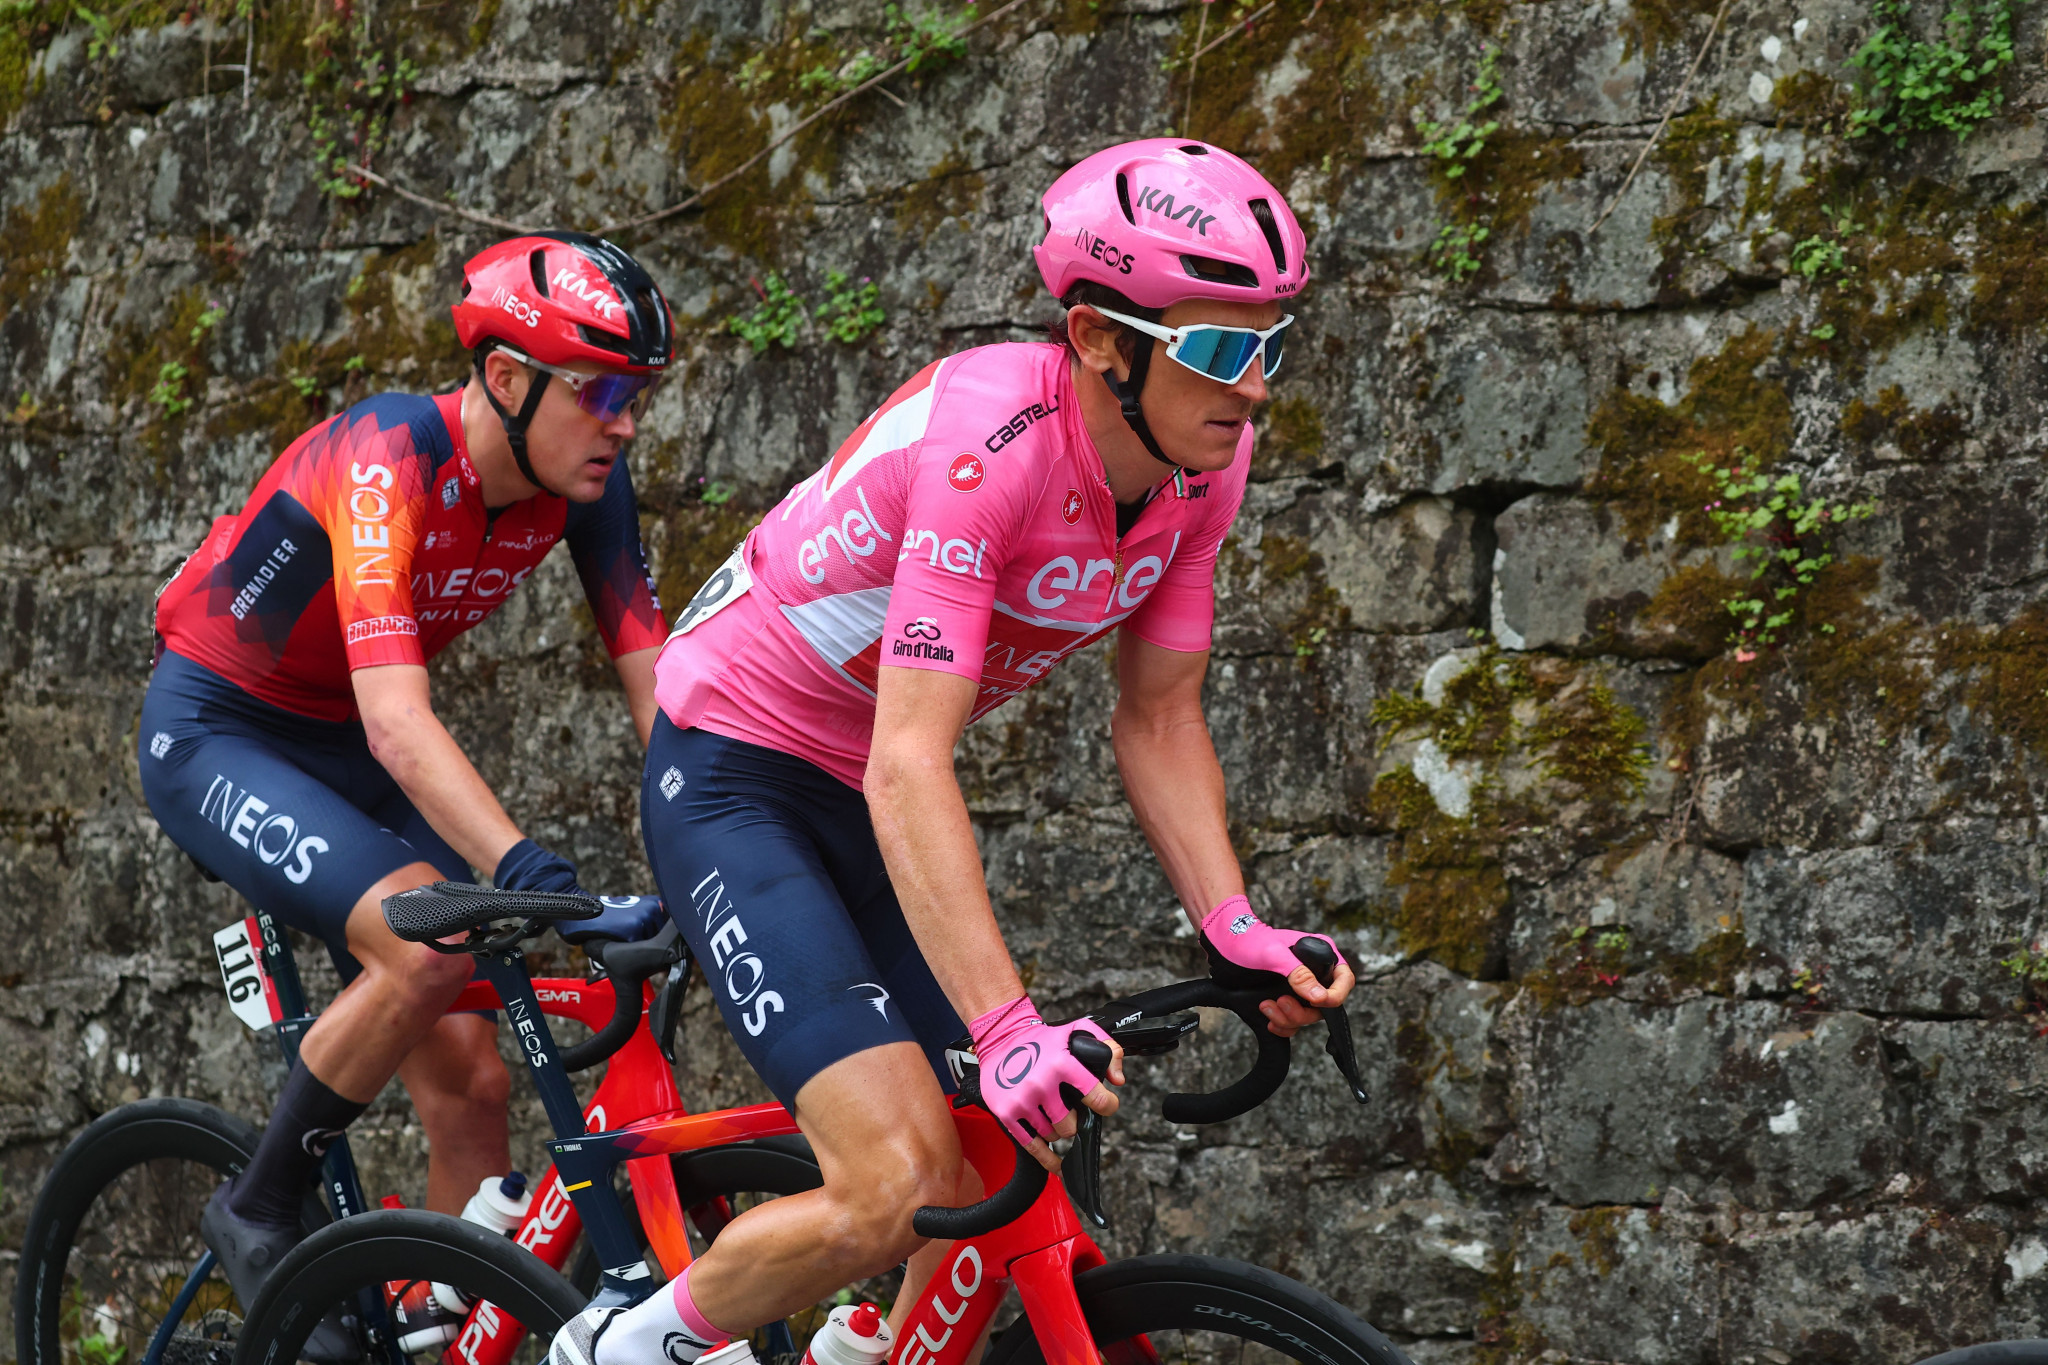 Overall race leader Geraint Thomas was able to remount and continue after a crash which put team mate Teo Geohegan Hart out of the Giro d'Italia ©Getty Images